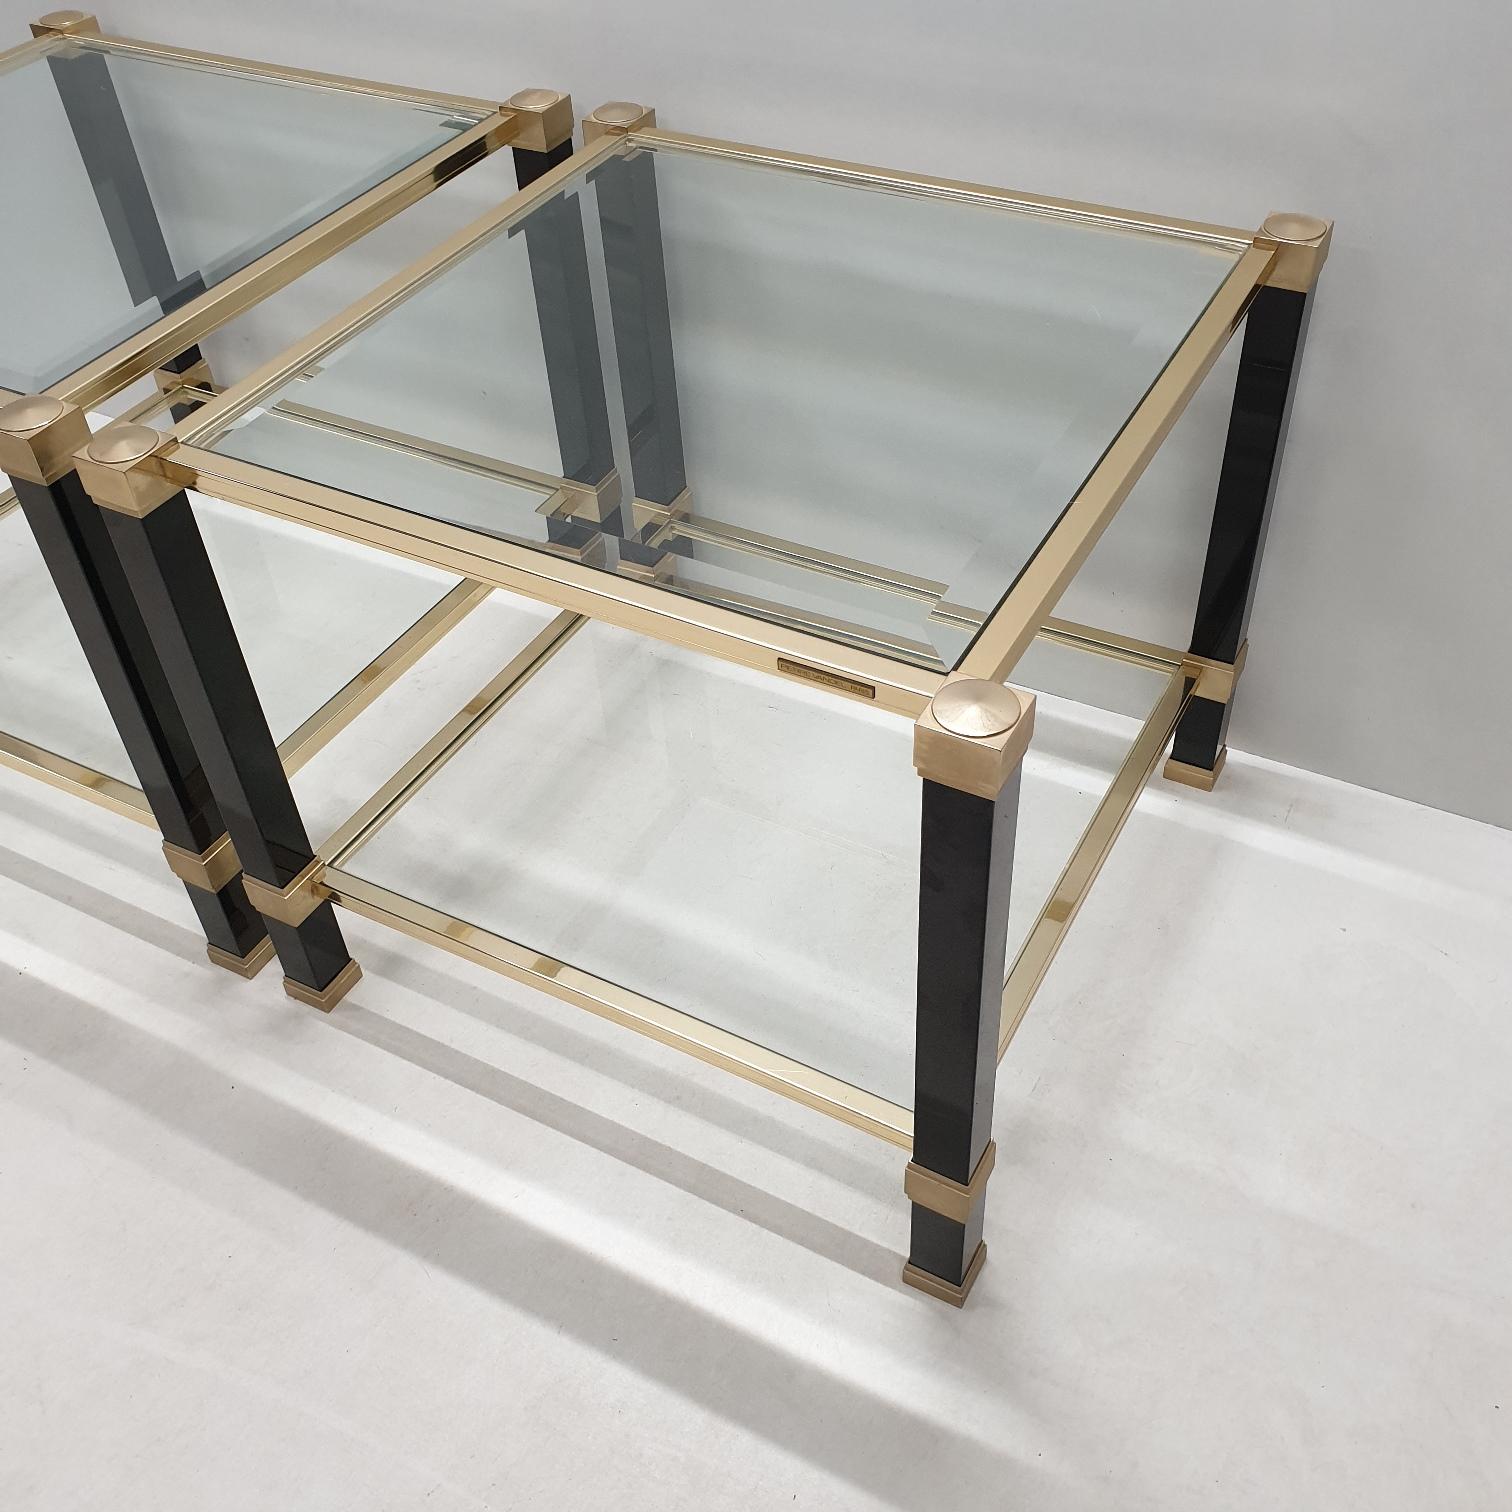 Cut Glass Pair of Brass 2-Tiers Square Site Tables by Pierre Vandel, 1980s, 1 Set of 2 For Sale